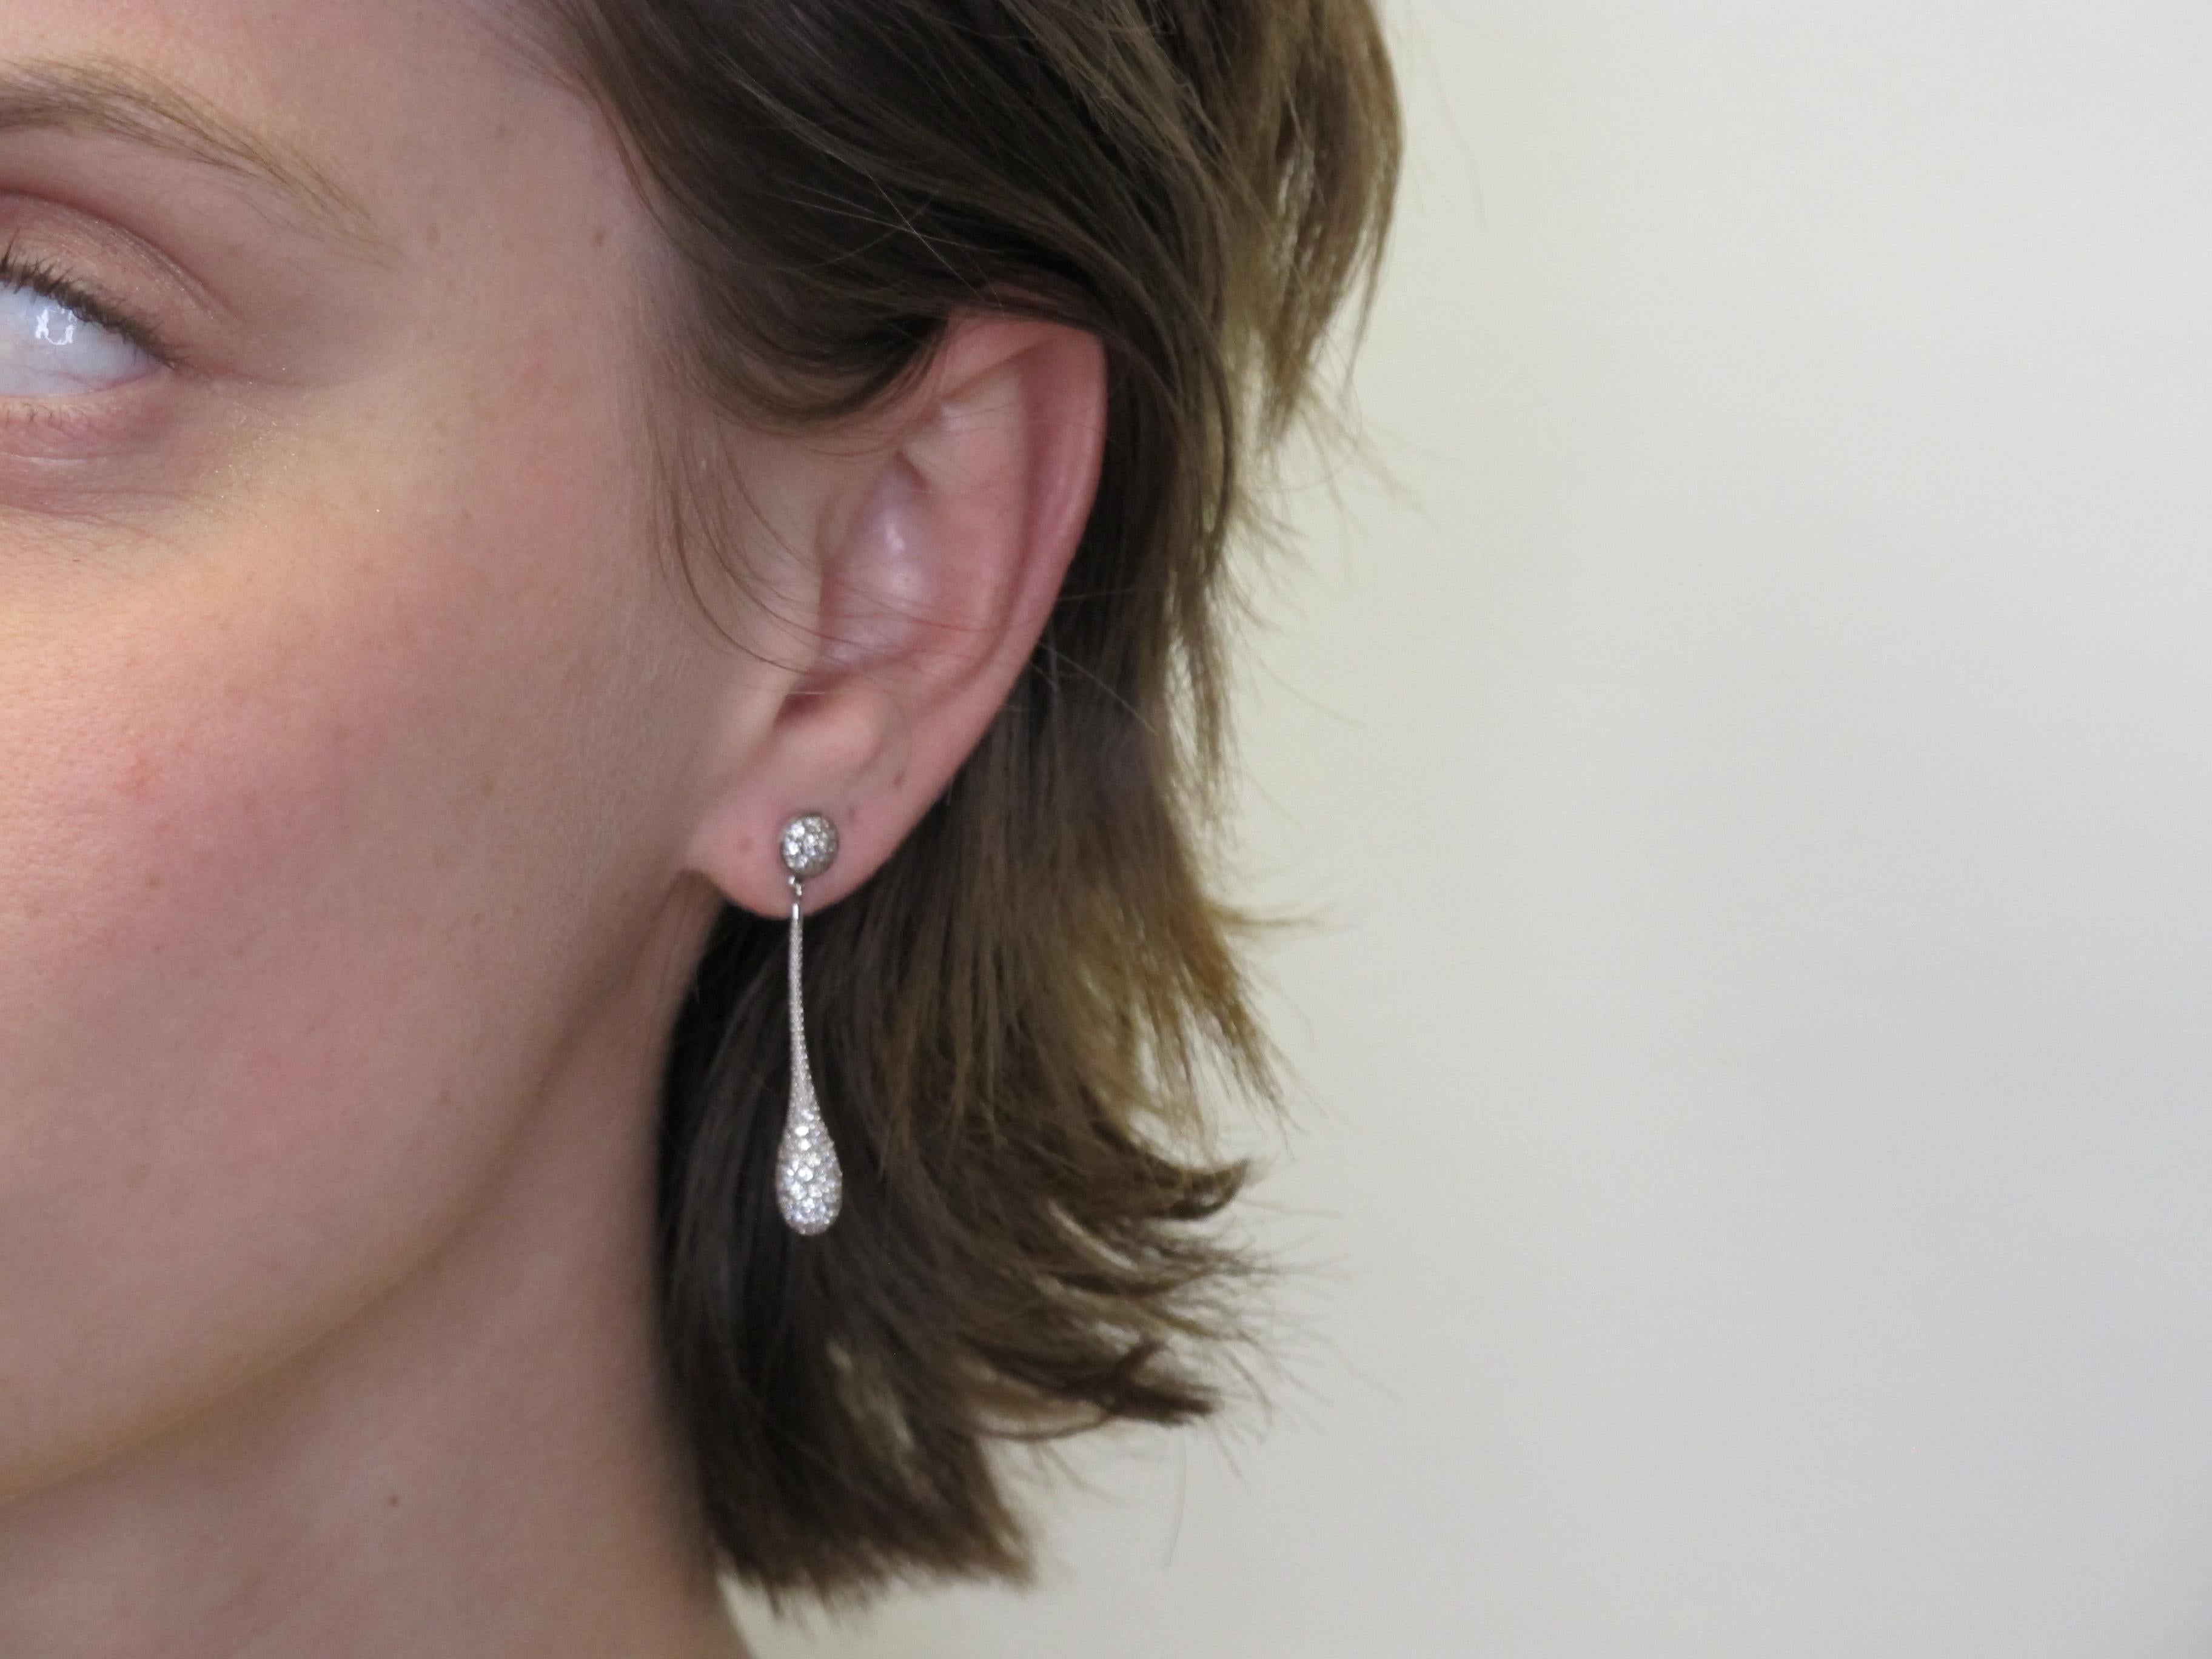 The design of these earrings is truly remarkable. These elongated teardrops feature sparkling diamonds pave set 360 degrees around the dangling portion of the earrings so they are exquisite when viewed from any angle. These 18k white gold earrings